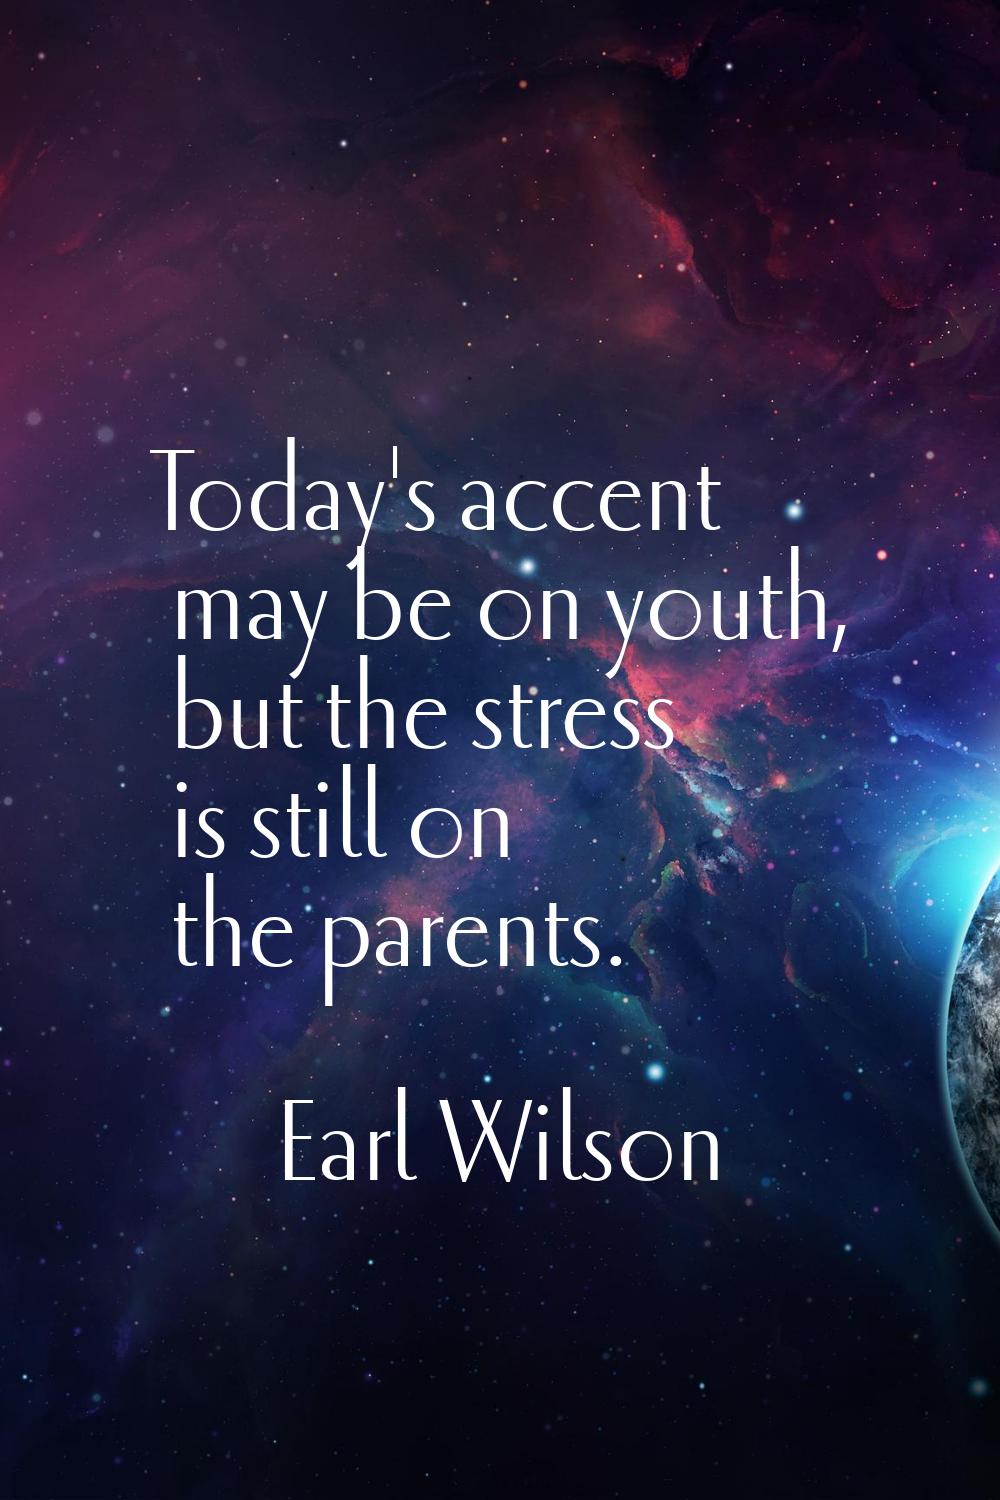 Today's accent may be on youth, but the stress is still on the parents.